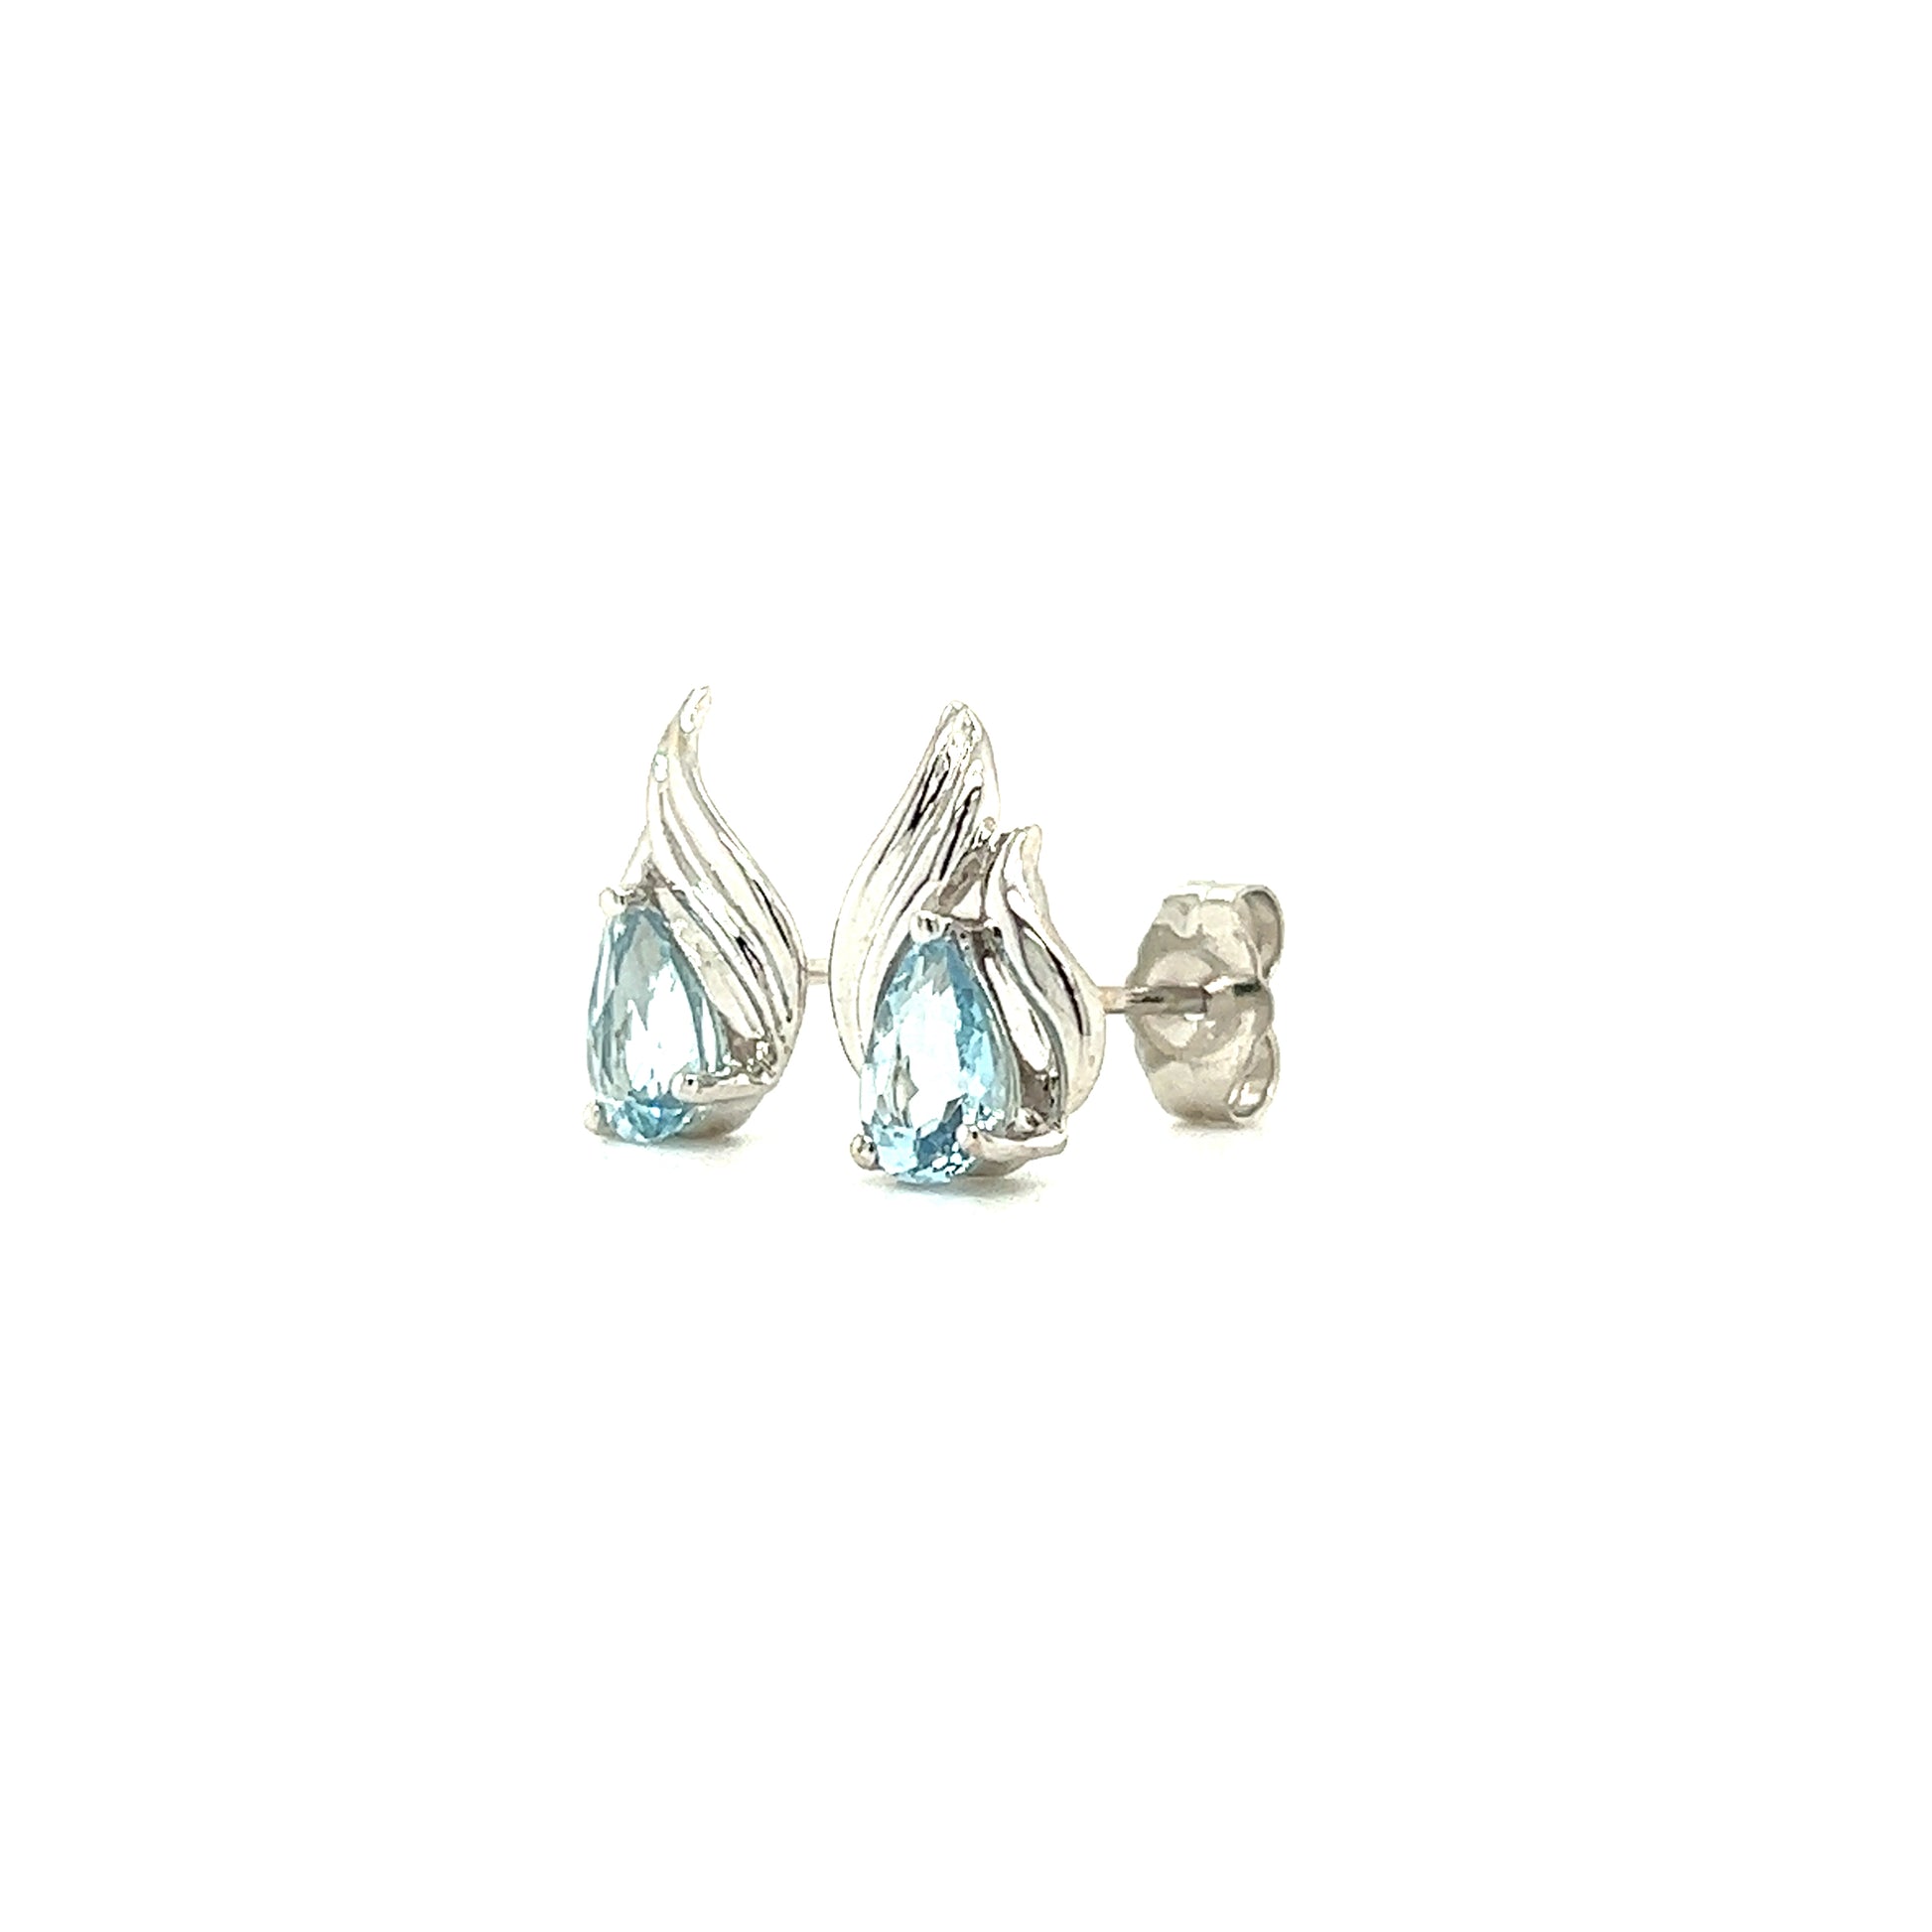 Pear Aquamarine Stud with Flame Motifs Earrings in 14K White Gold Right Side View